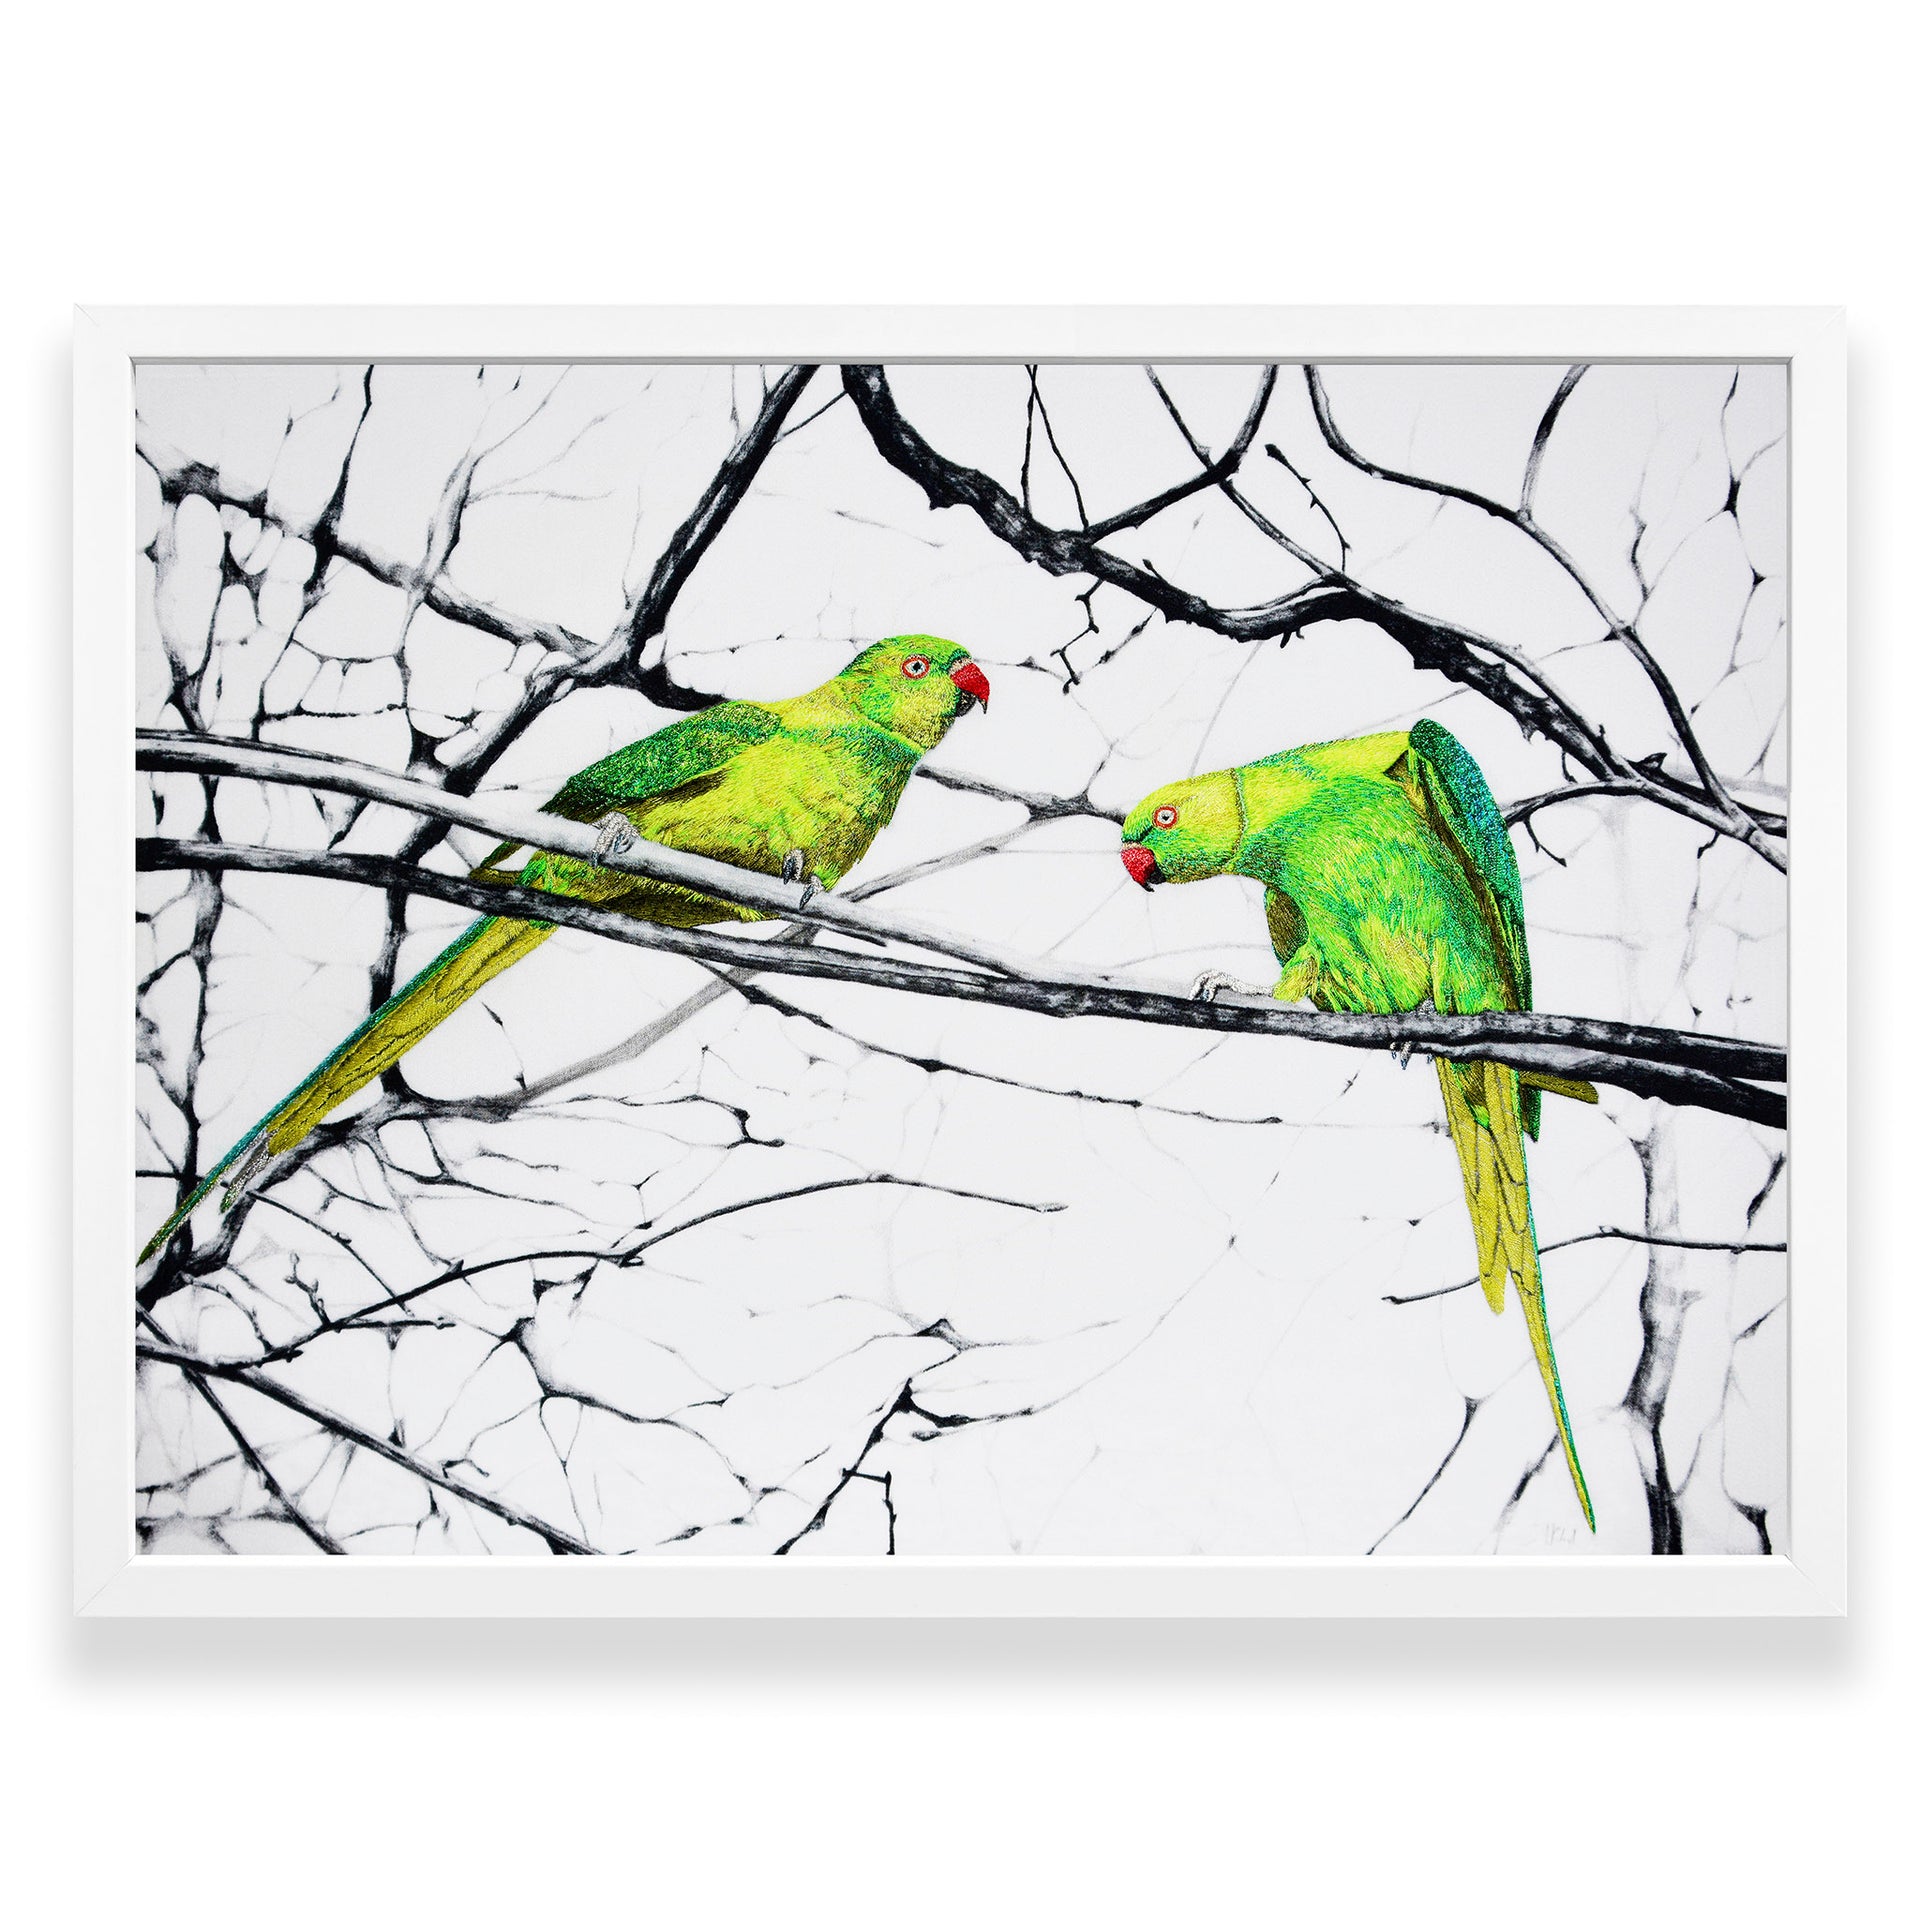 Hand embroidered Parakeets artwork in white frame